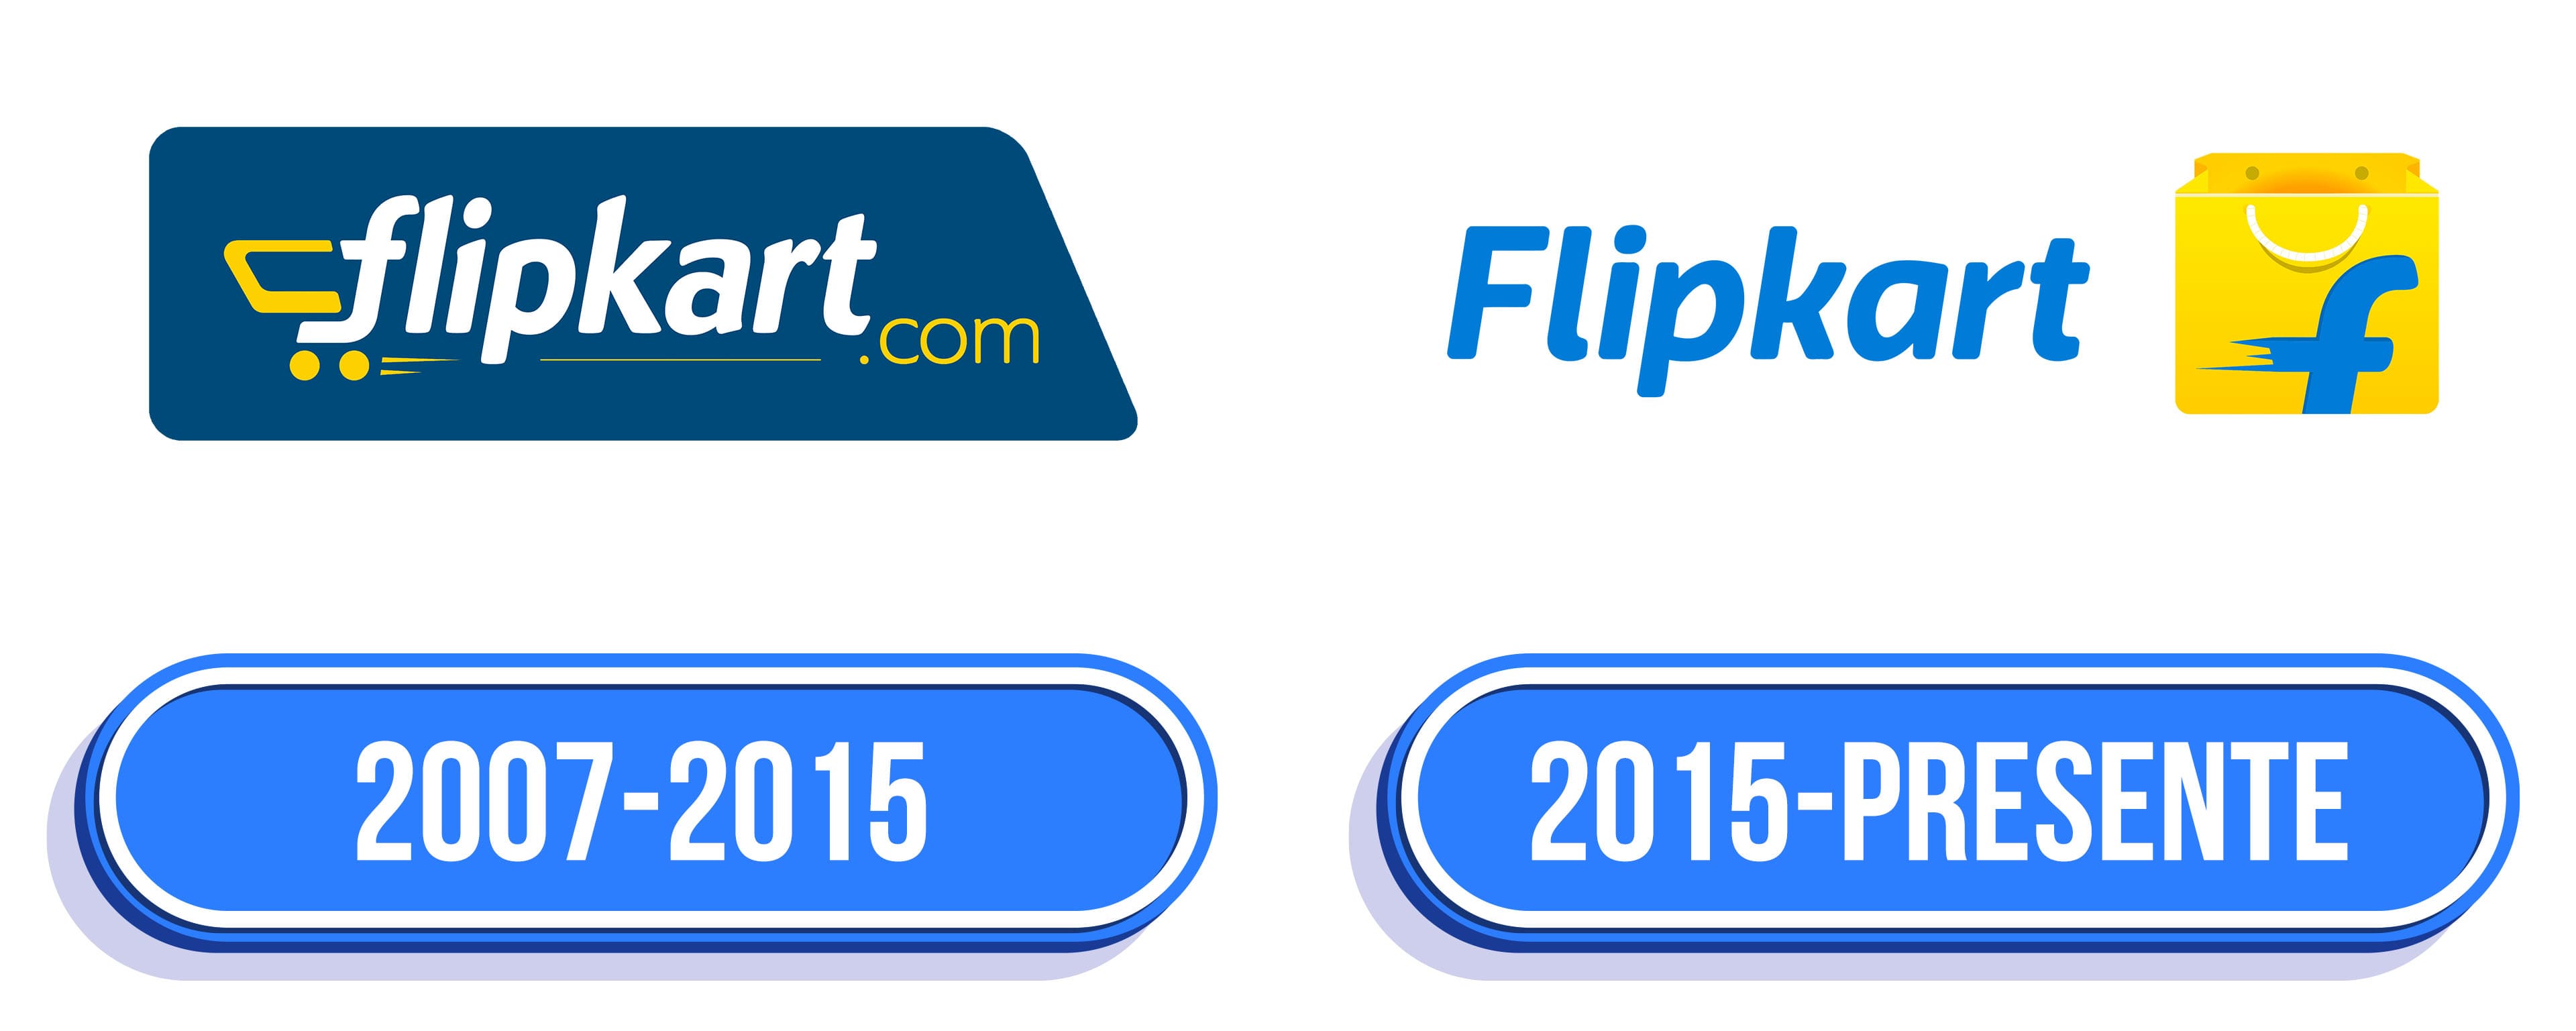 Which font is used in flipkart logo? - Quora